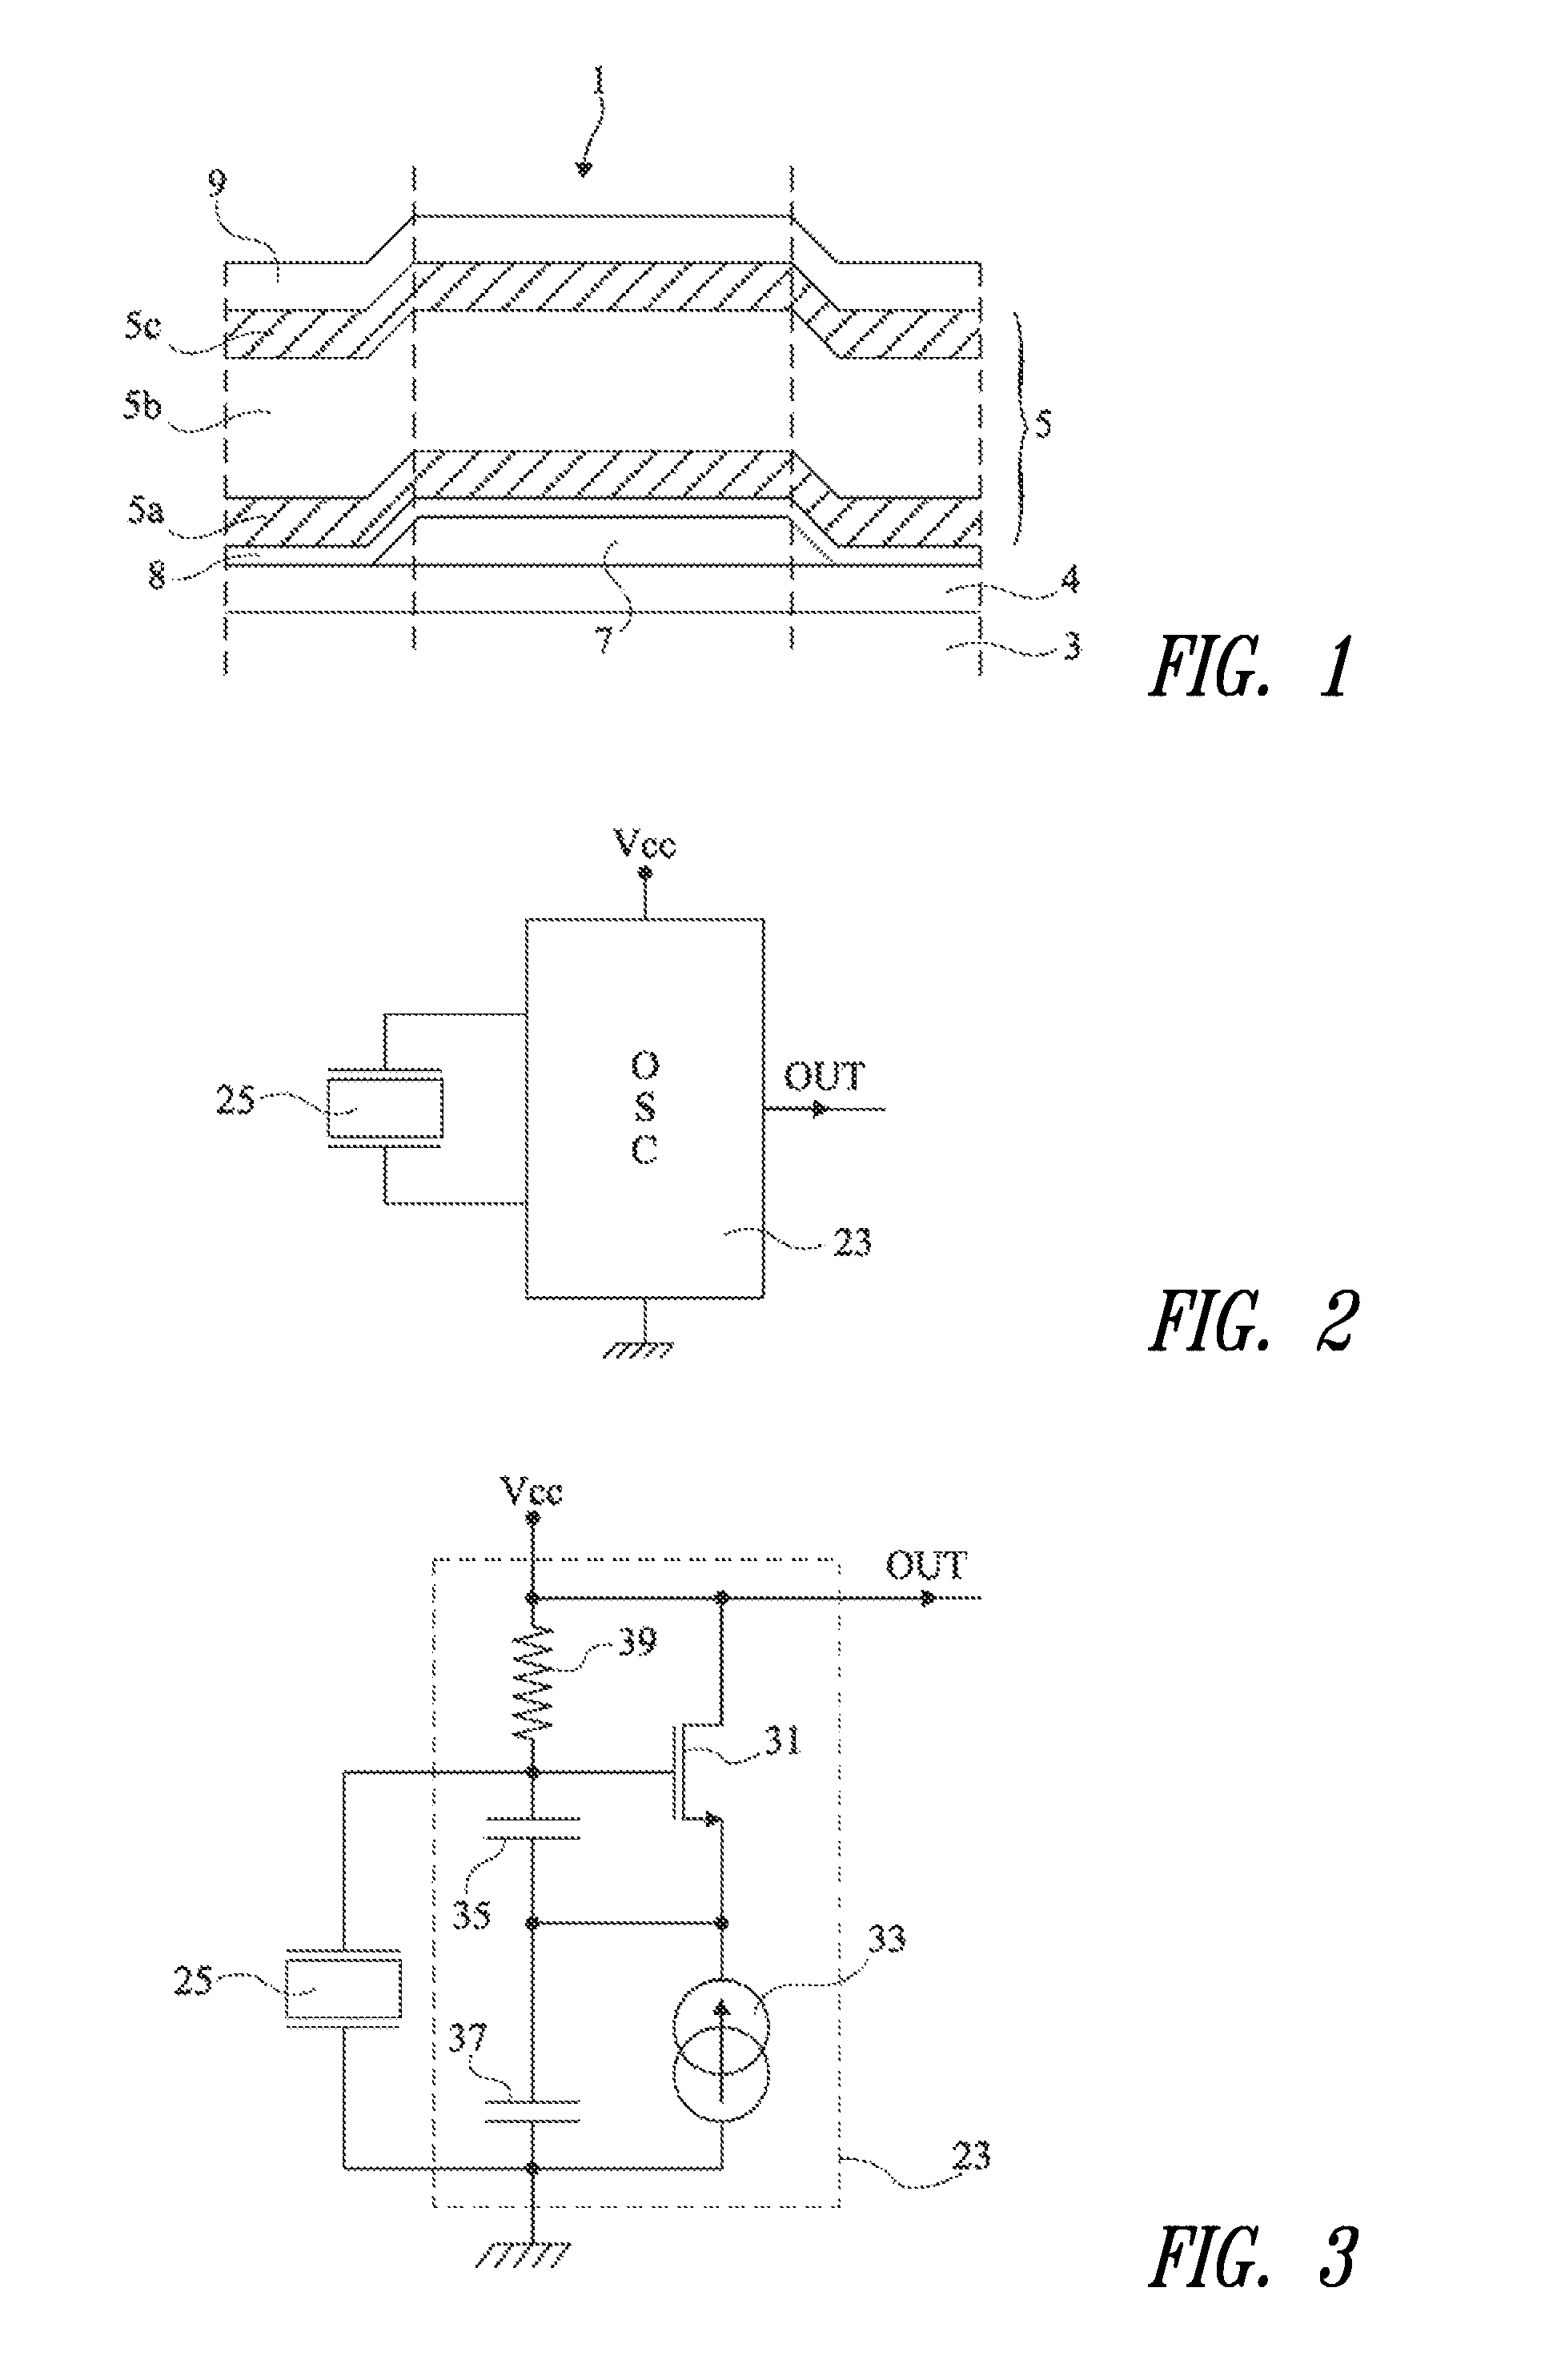 Method of adjustment during manufacture of a circuit having a capacitor